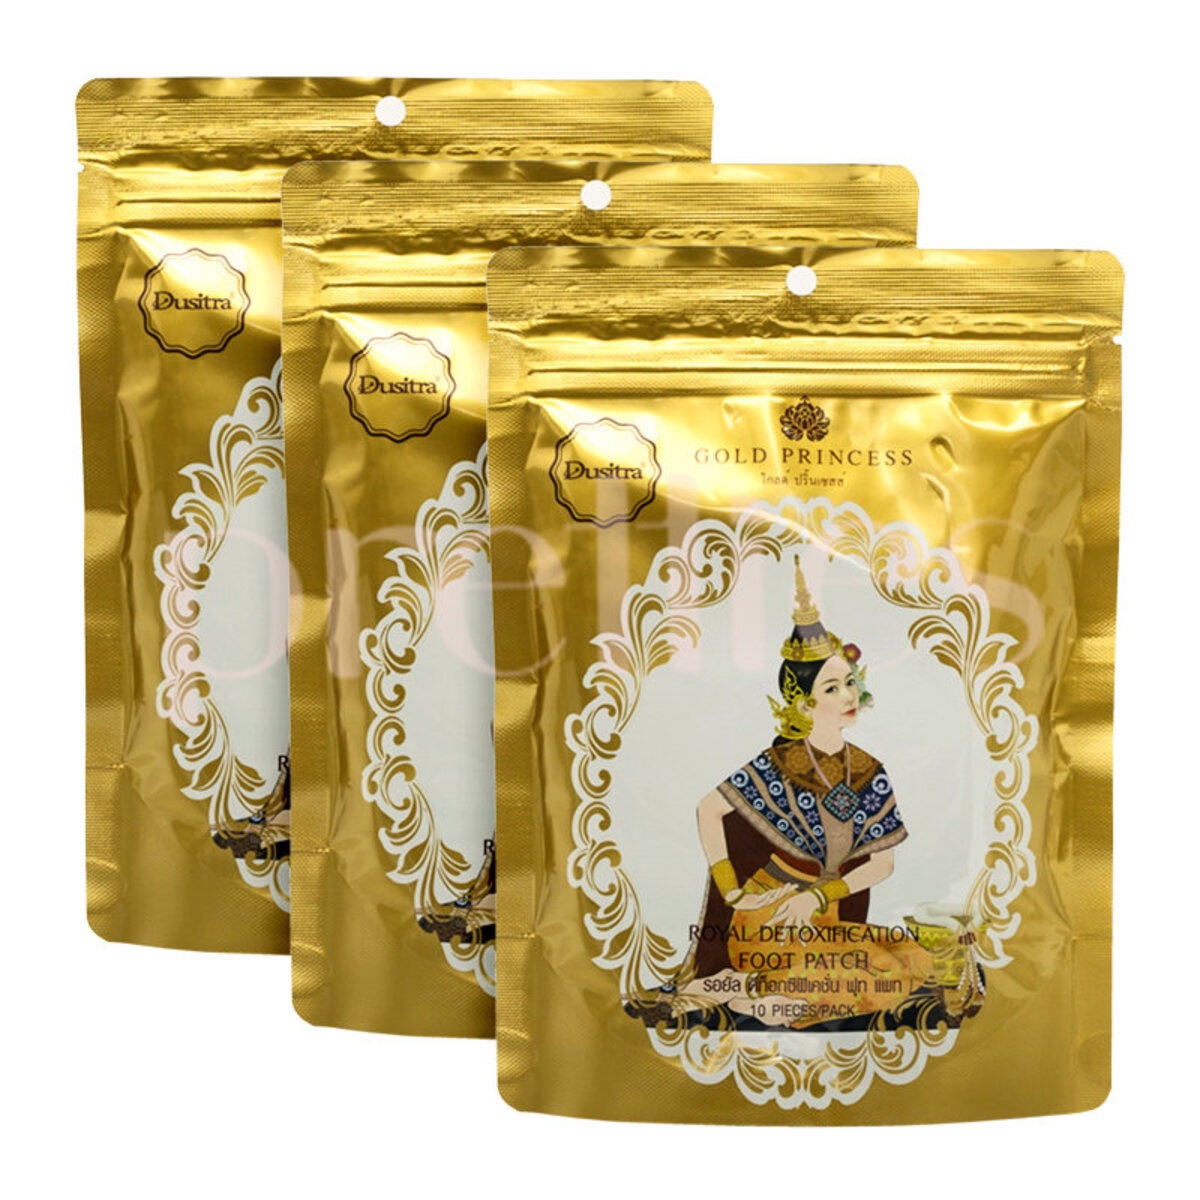 PRE ORDER | Gold Princess Royal Detoxification Foot Patch [10 Patches]